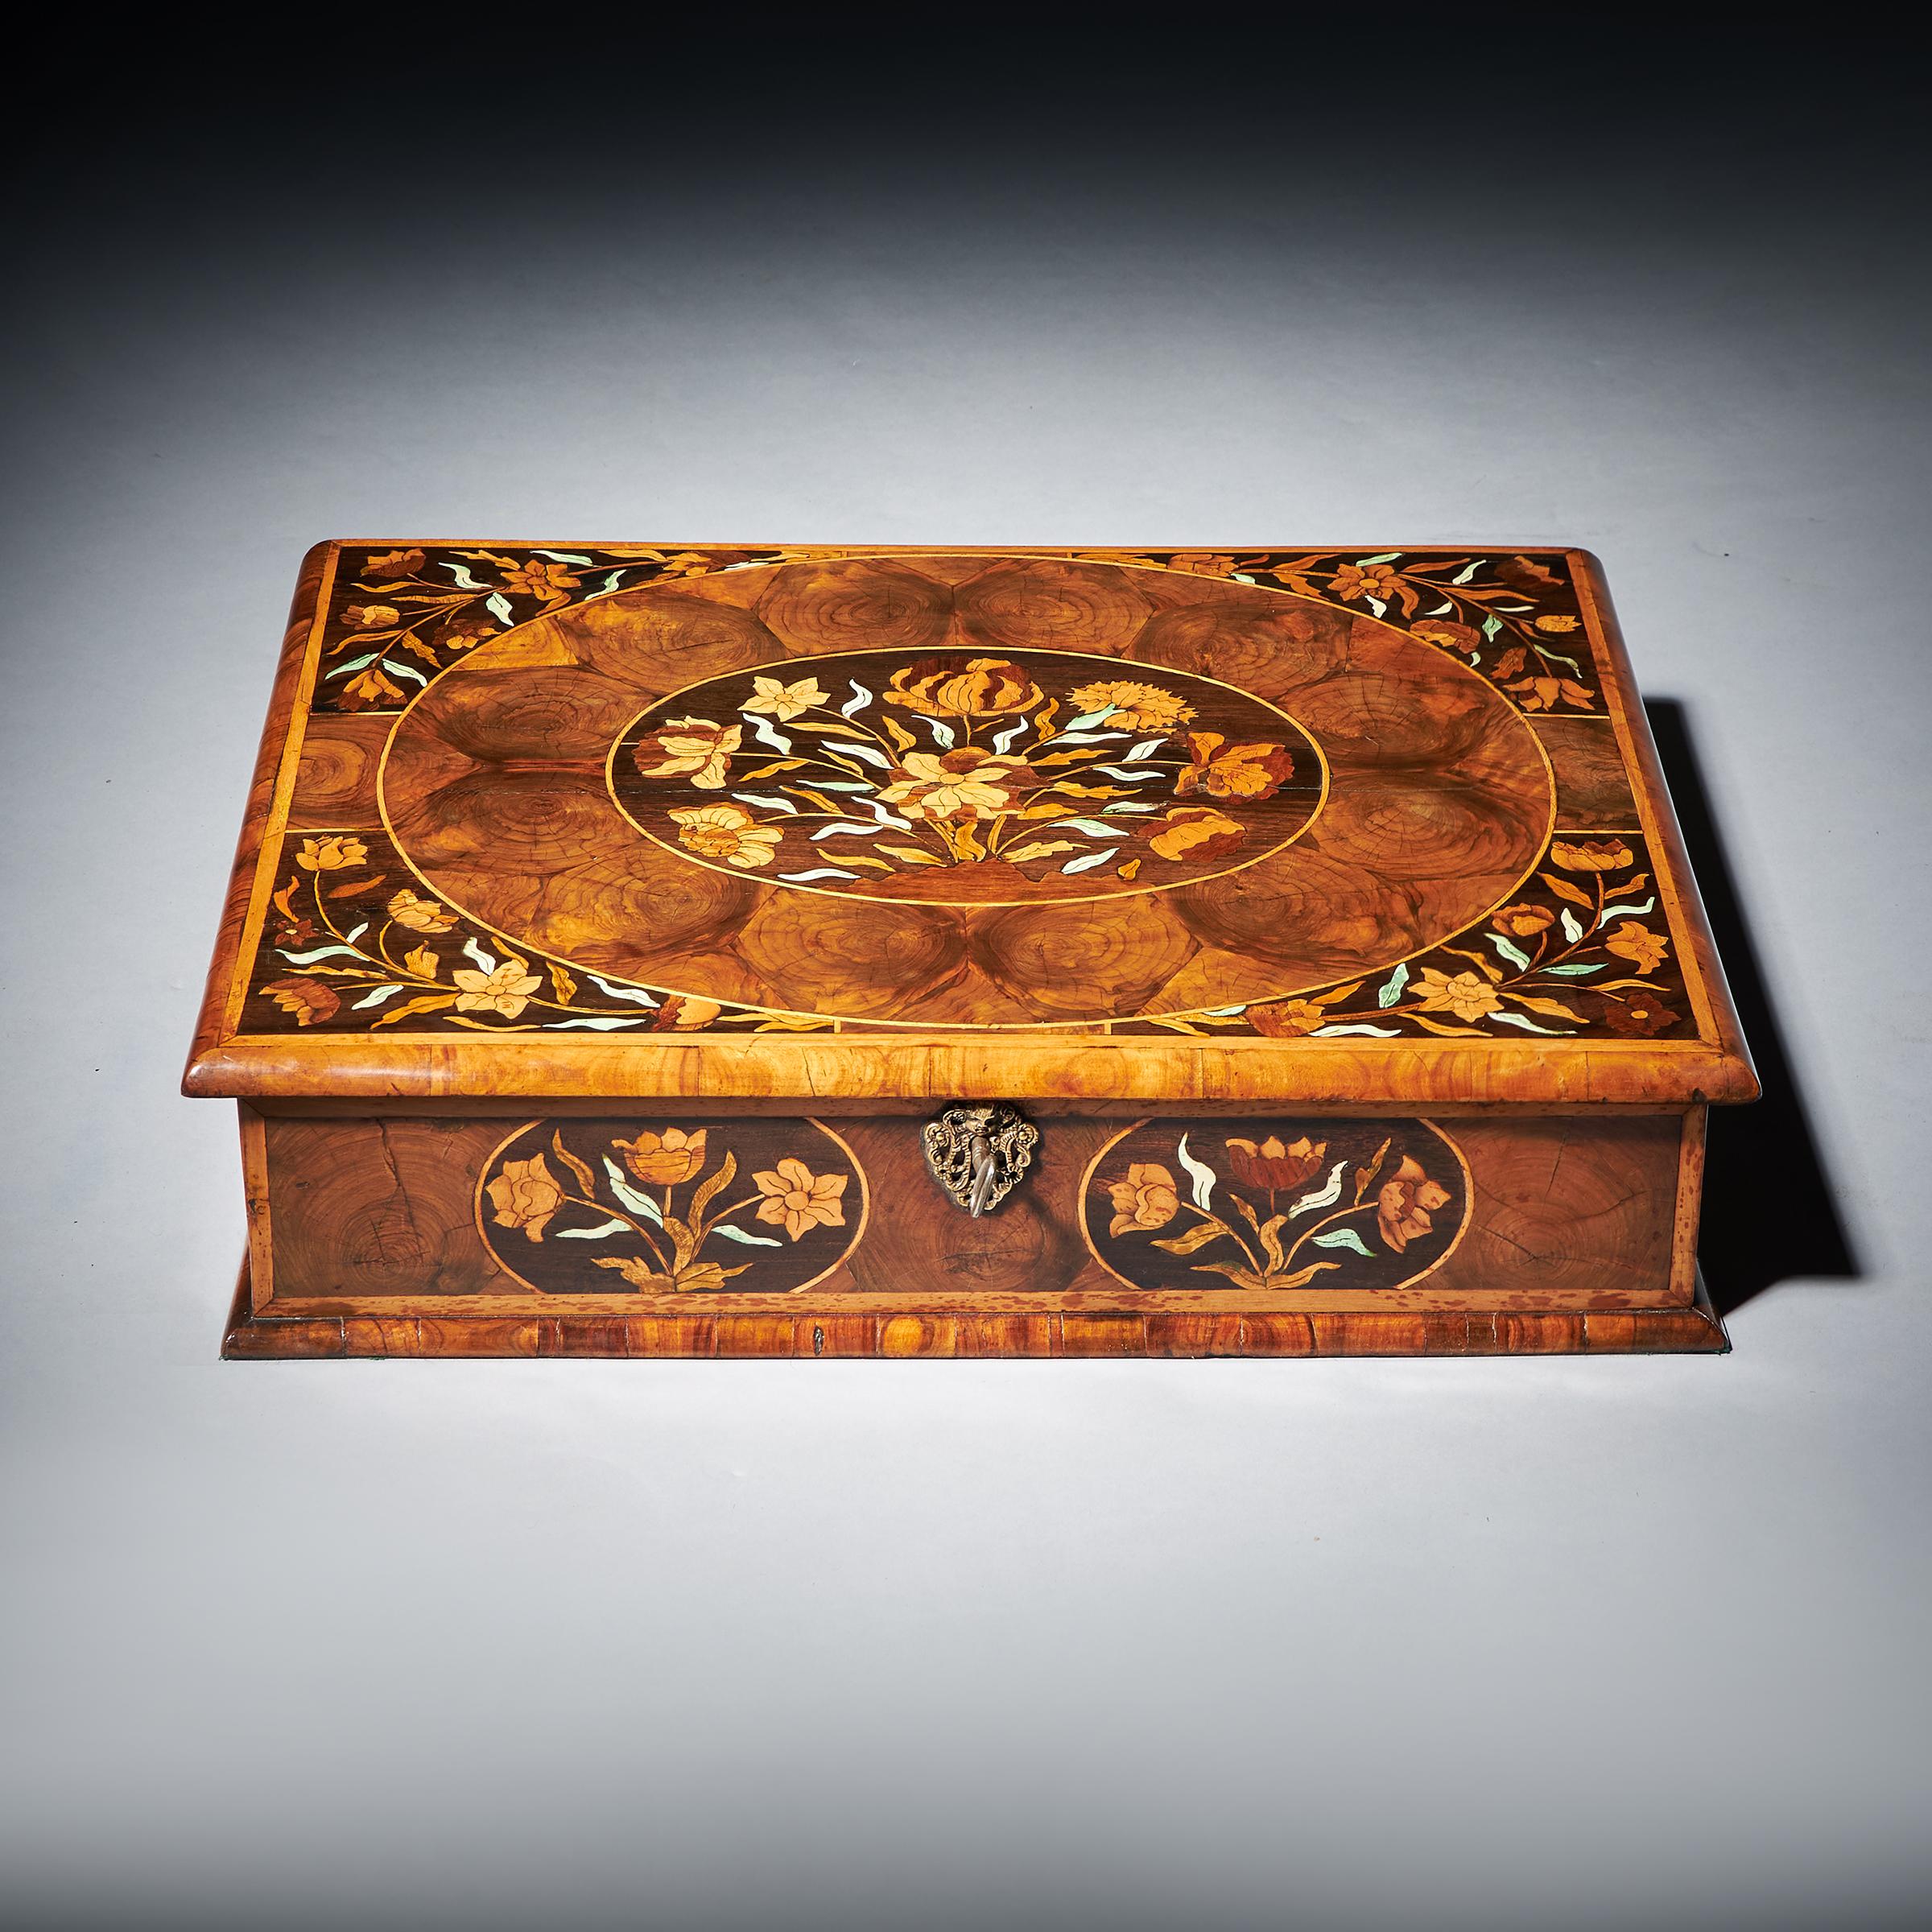 English 17th Century William and Mary Floral Marquetry Olive Oyster Lace Box, circa 1680